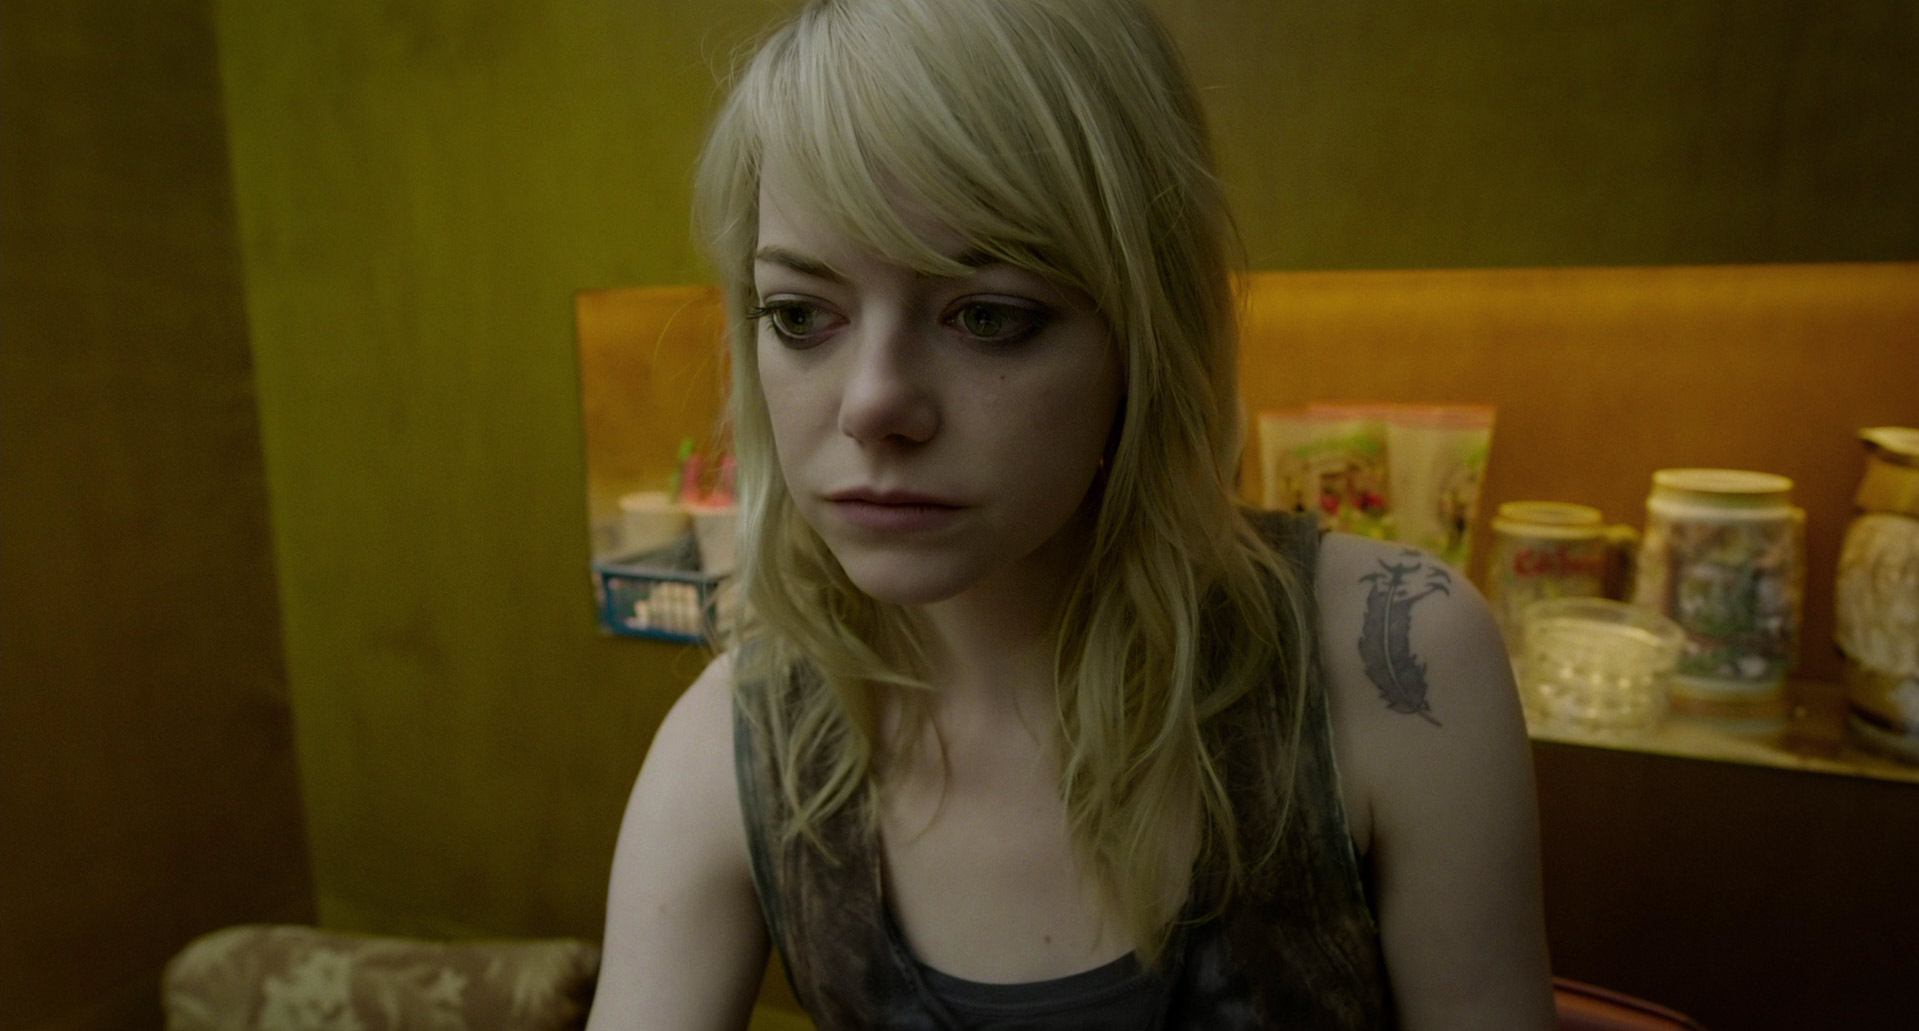 Emma Stone in Birdman or (The Unexpected Virtue of Ignorance)